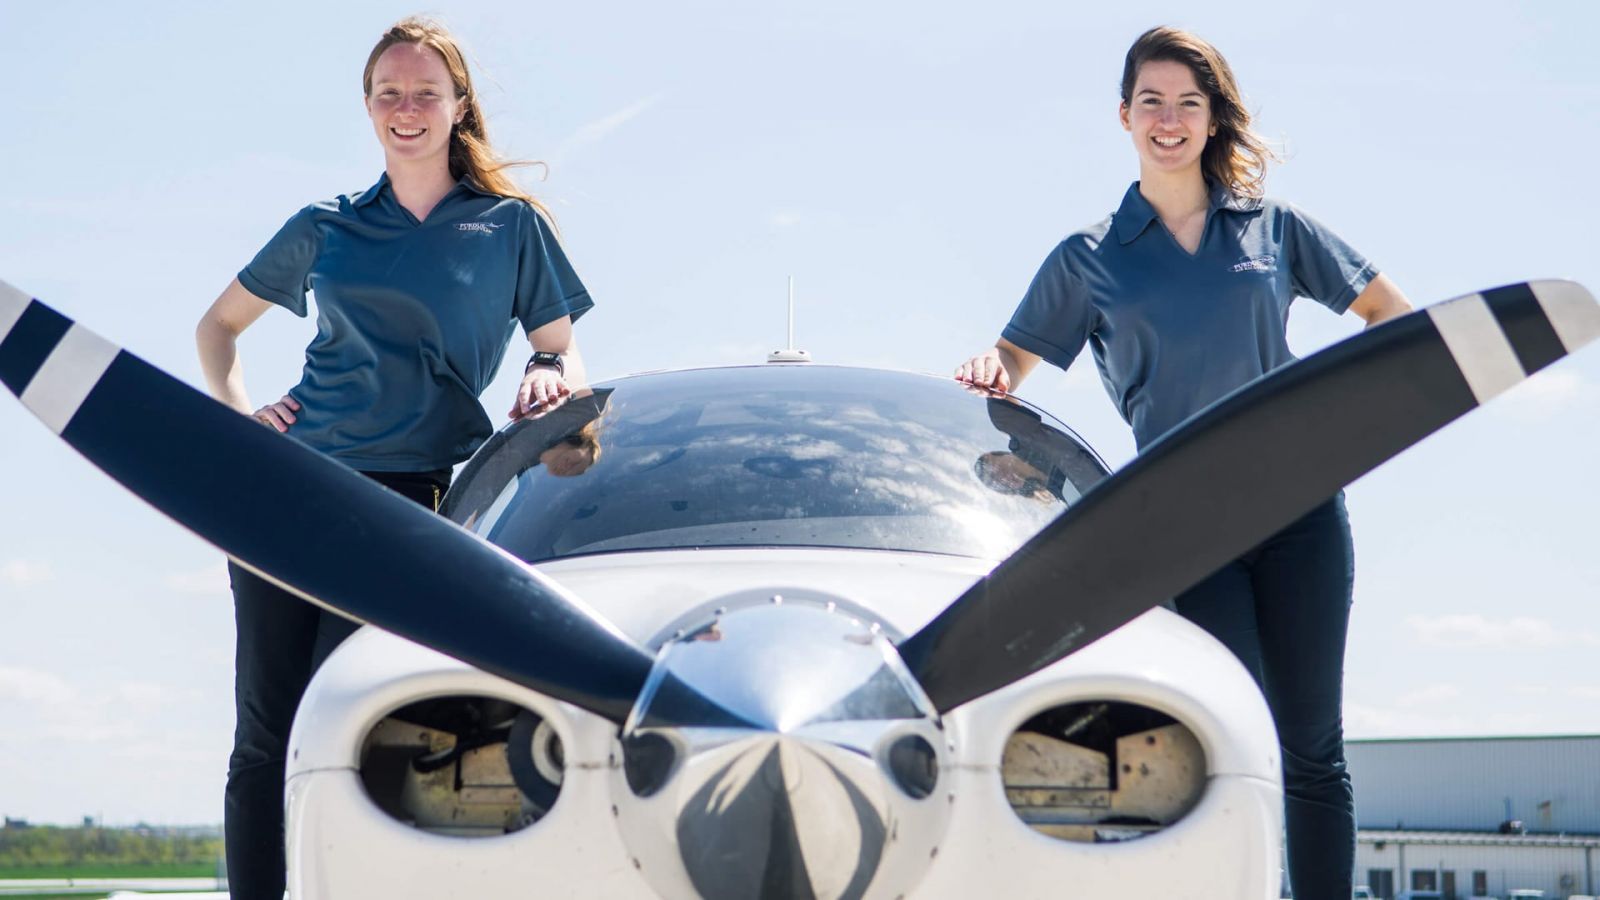 Pilot Tiffany Imhoff and co-pilot Nina Bouthier, both Professional Flight program majors at Purdue, will be representing the university among the field of teams in this year’s Air Race Classic. (Purdue University photo/ Christopher Konecnik)